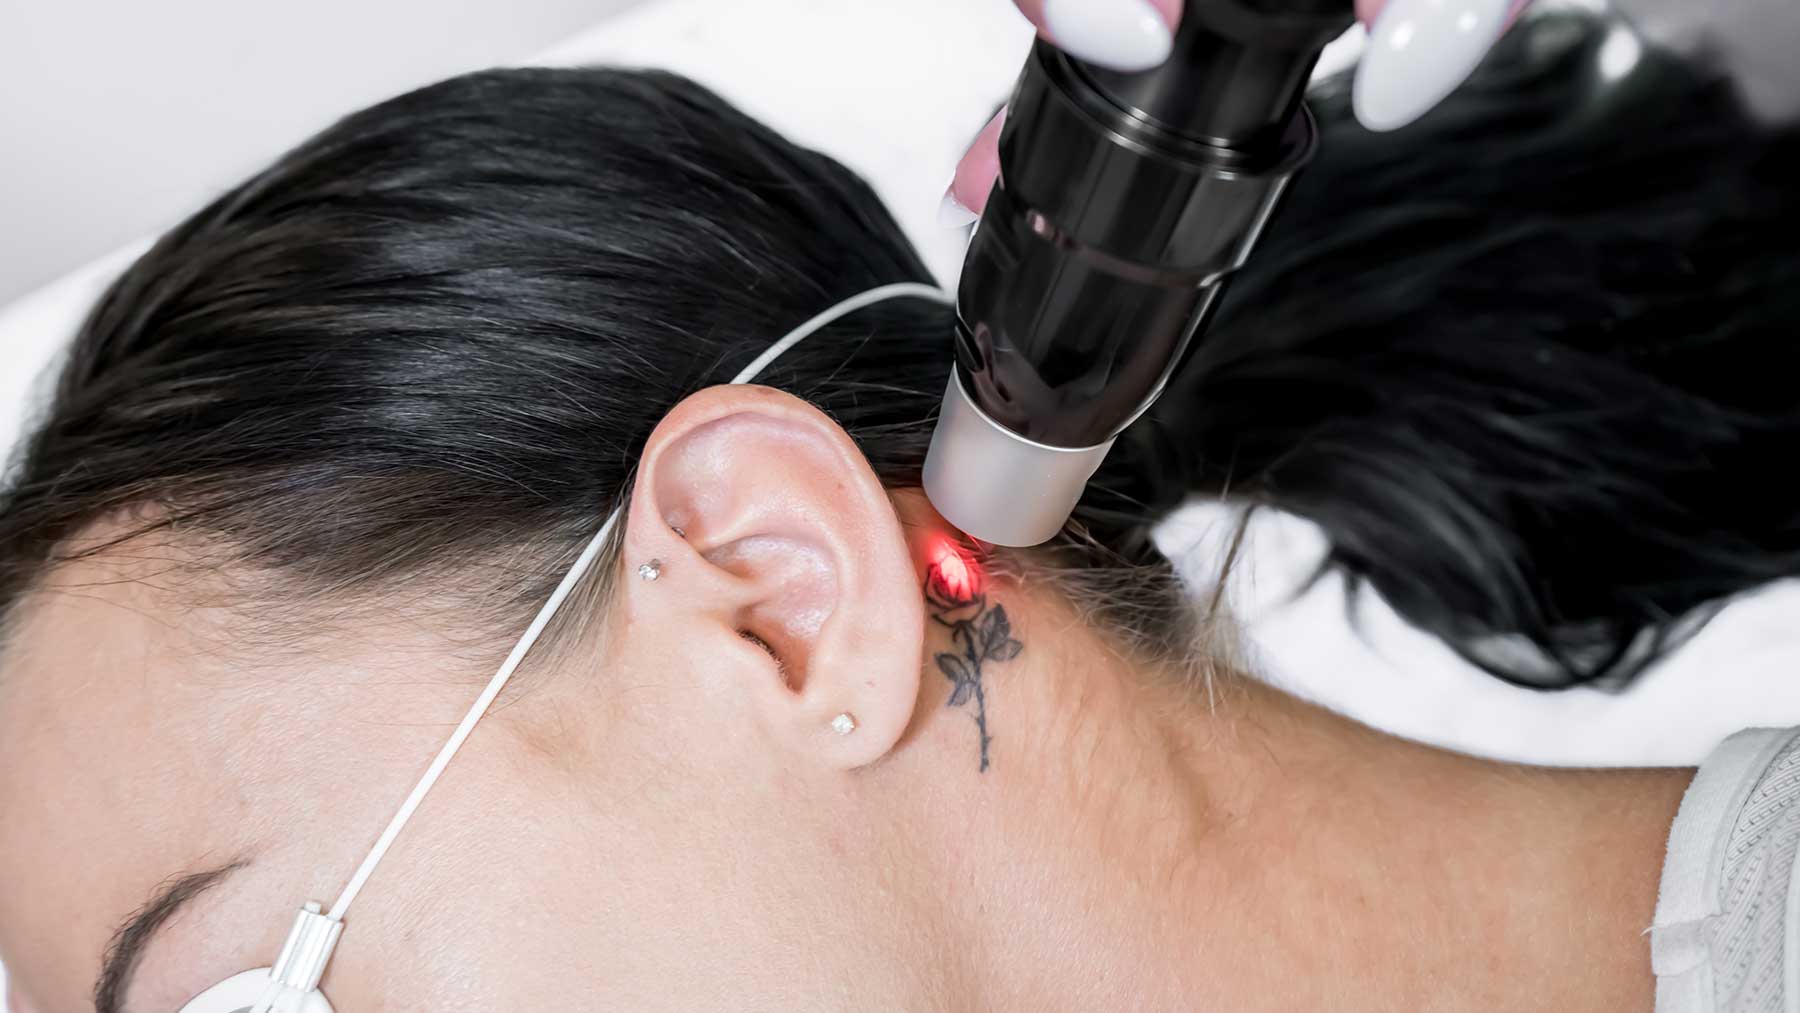 What Laser Tattoo Removal Safety Glasses Should I Use? - Safety Protection  Glasses